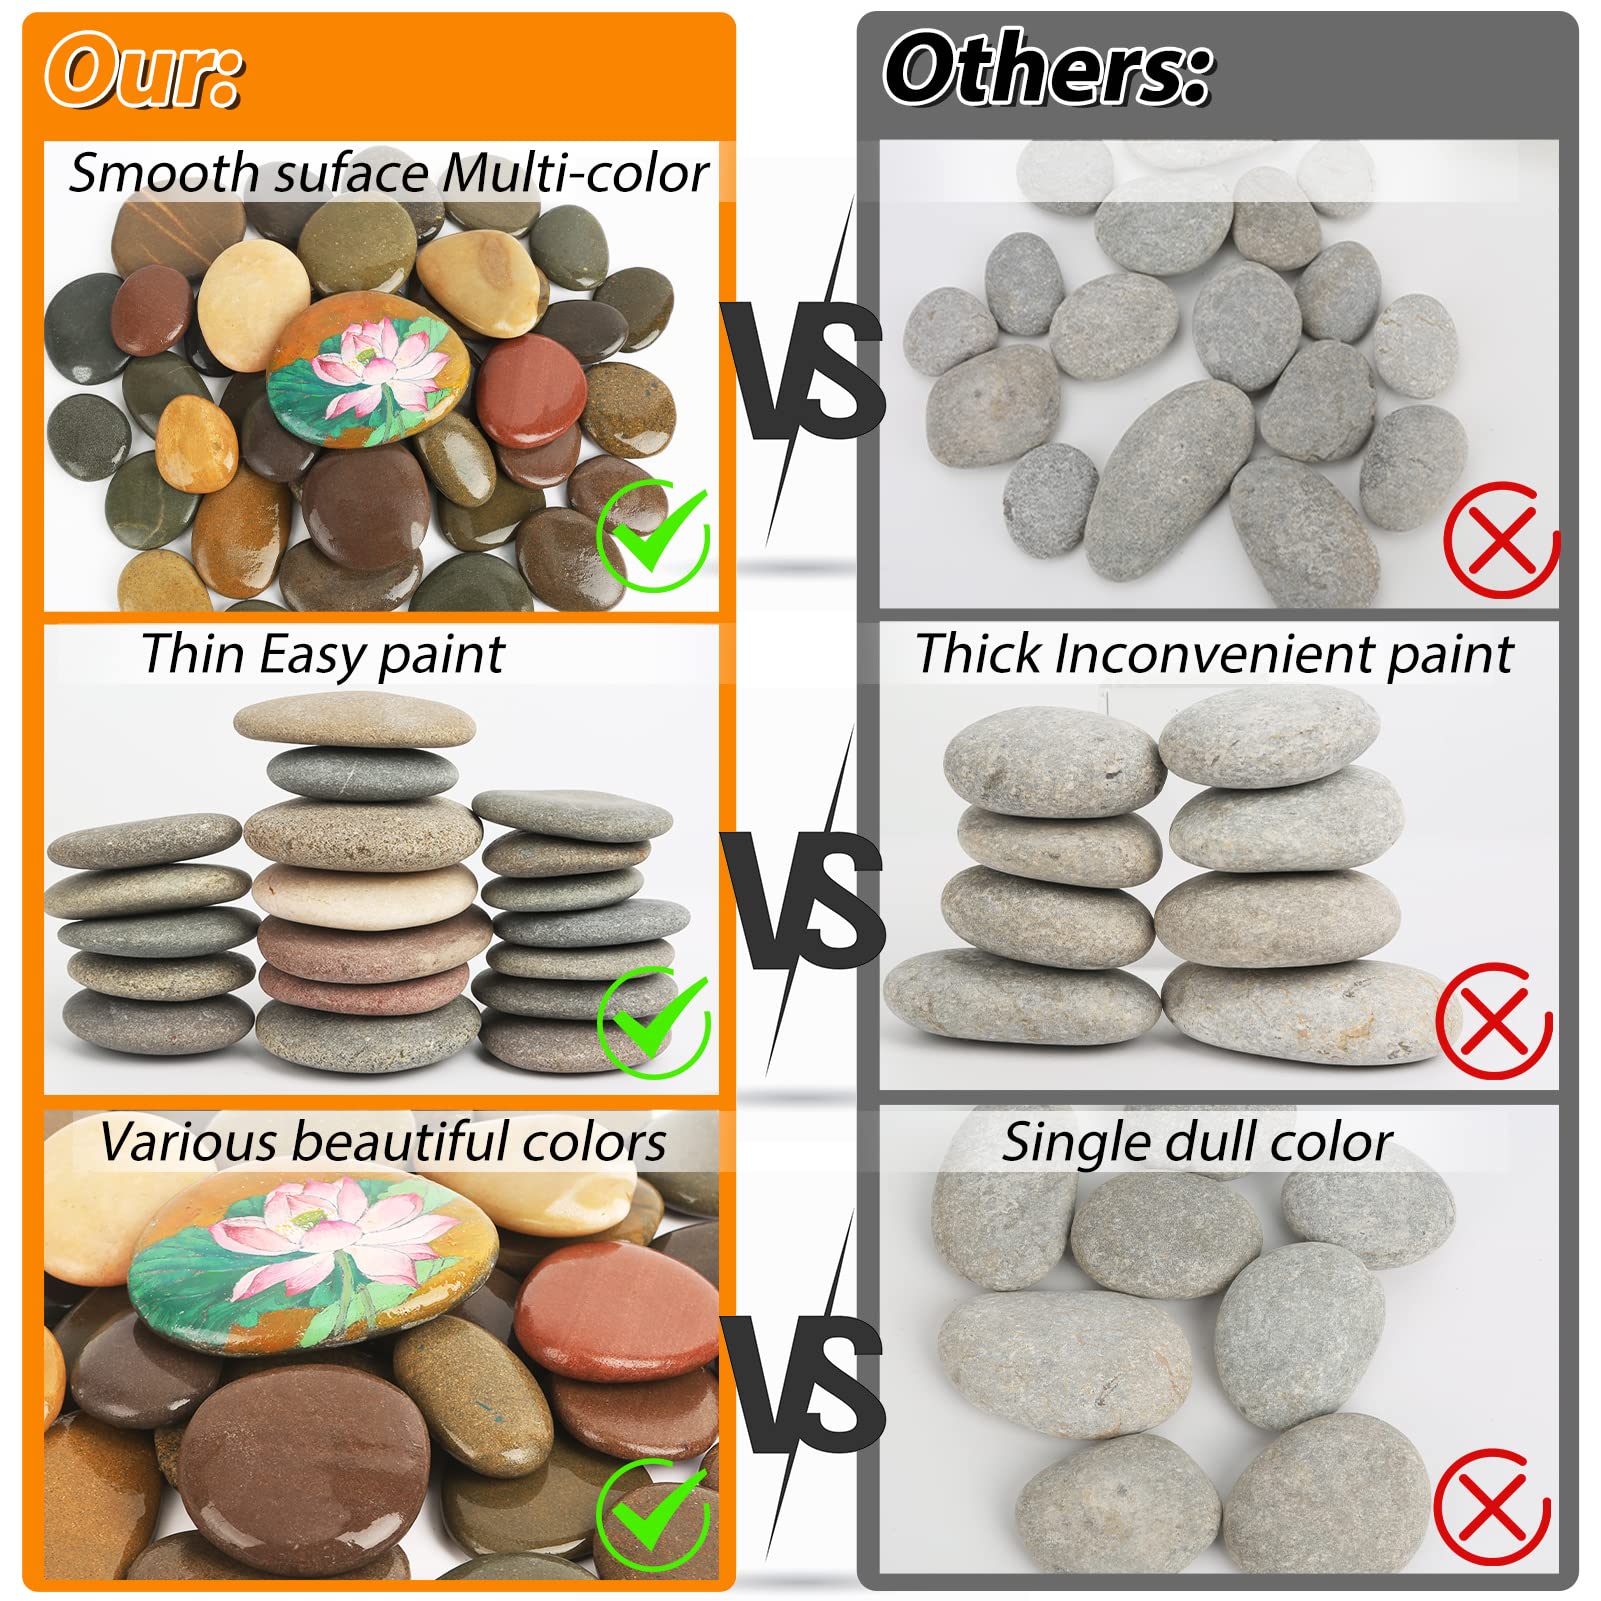 22PCS Large Painting Rocks,Flat and Smooth,Multi-Color Painting Stones,2"-3.5" inches Stones for Arts & DIY, Mandala and Kindness Rocks,Hand Picked,Perfect for Kids Party,Crafts and Decoration